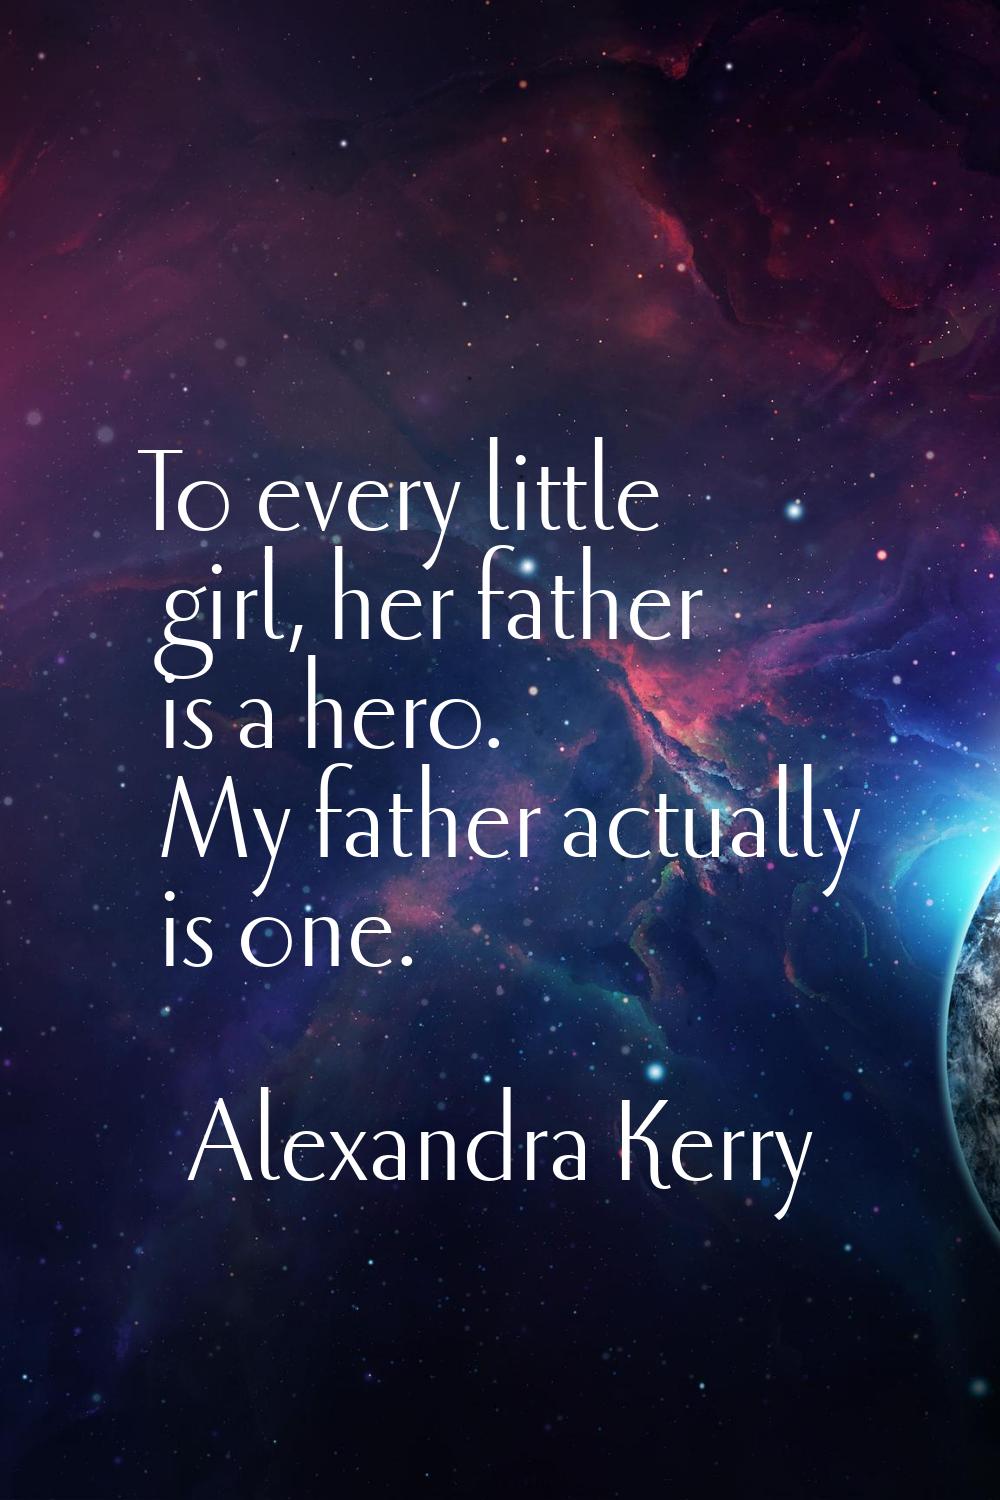 To every little girl, her father is a hero. My father actually is one.